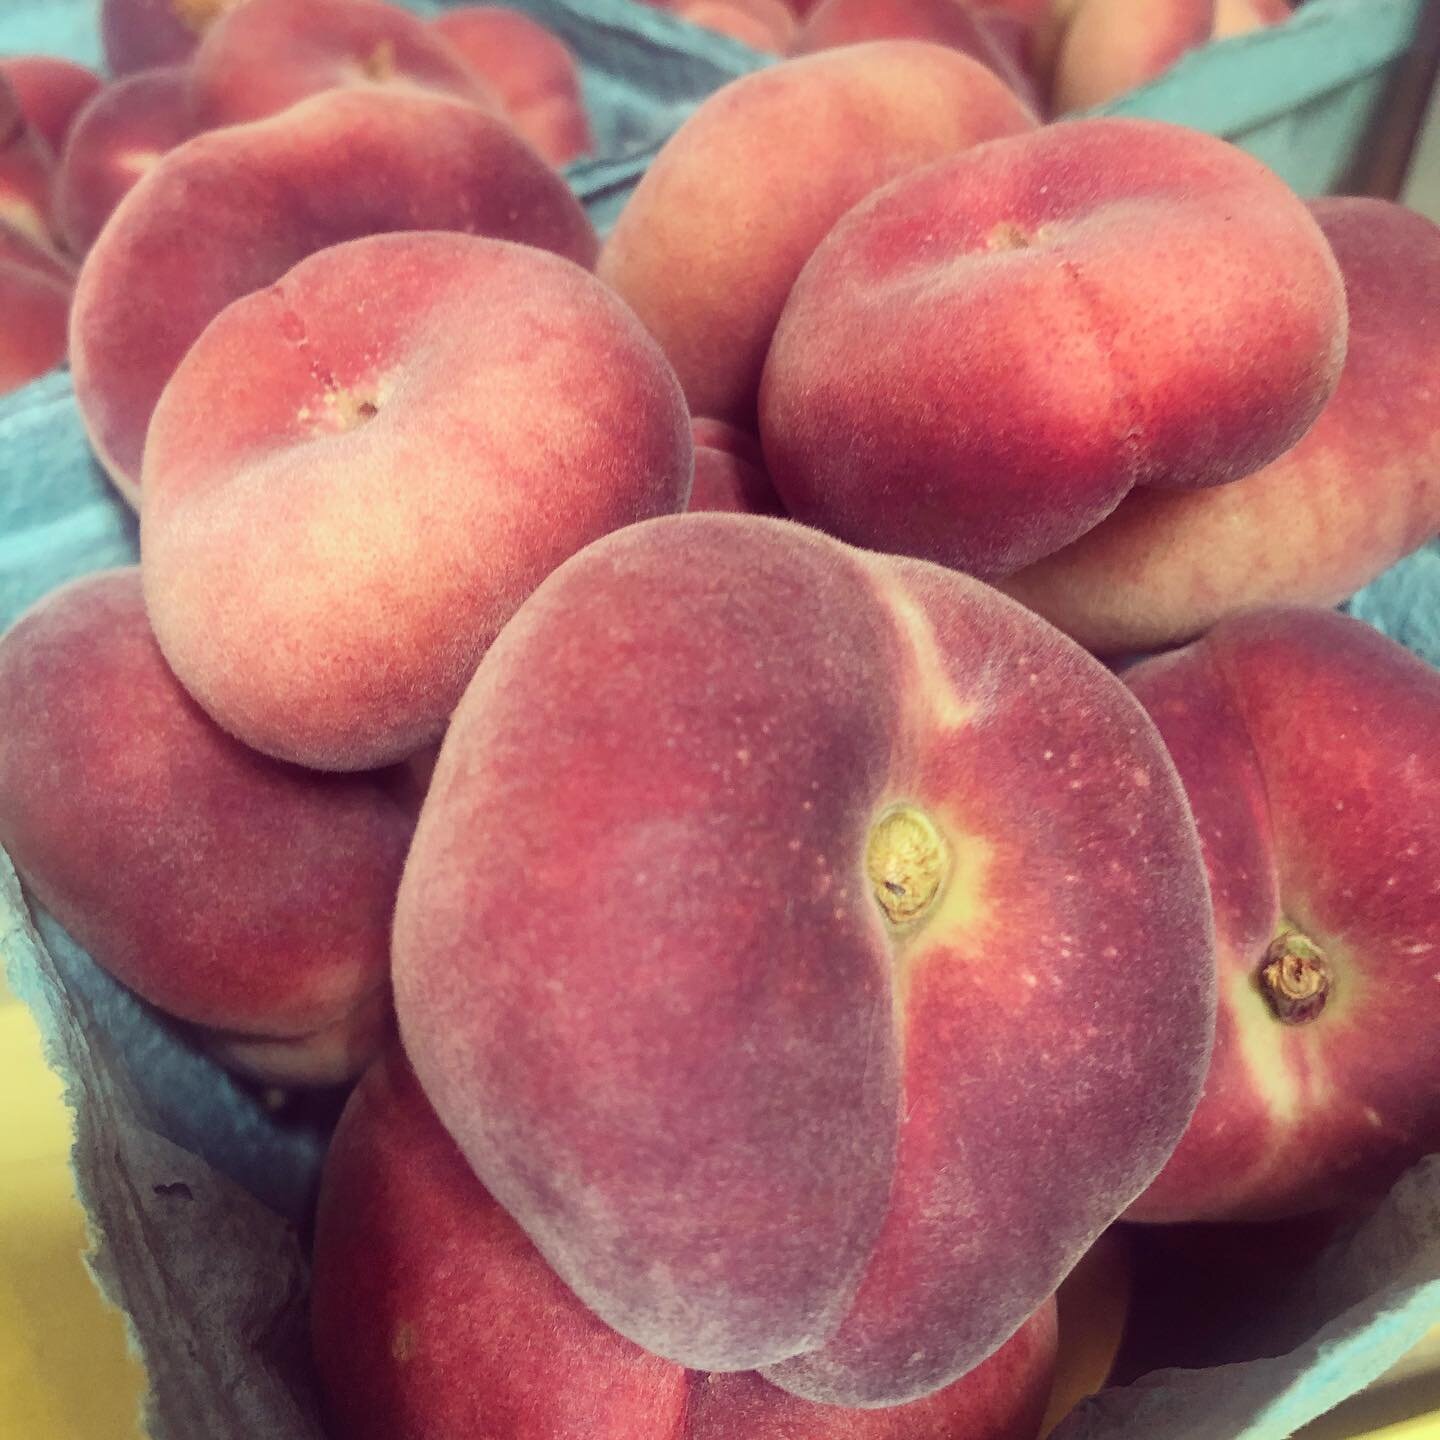 A limited number of white flesh donut peaches in the market this morning! First come, first served🍑 we also have plenty of Garnet Beauty and Summer Serenade cling peaches and we would love to cut you a sample. We expect to have some yellow flesh don